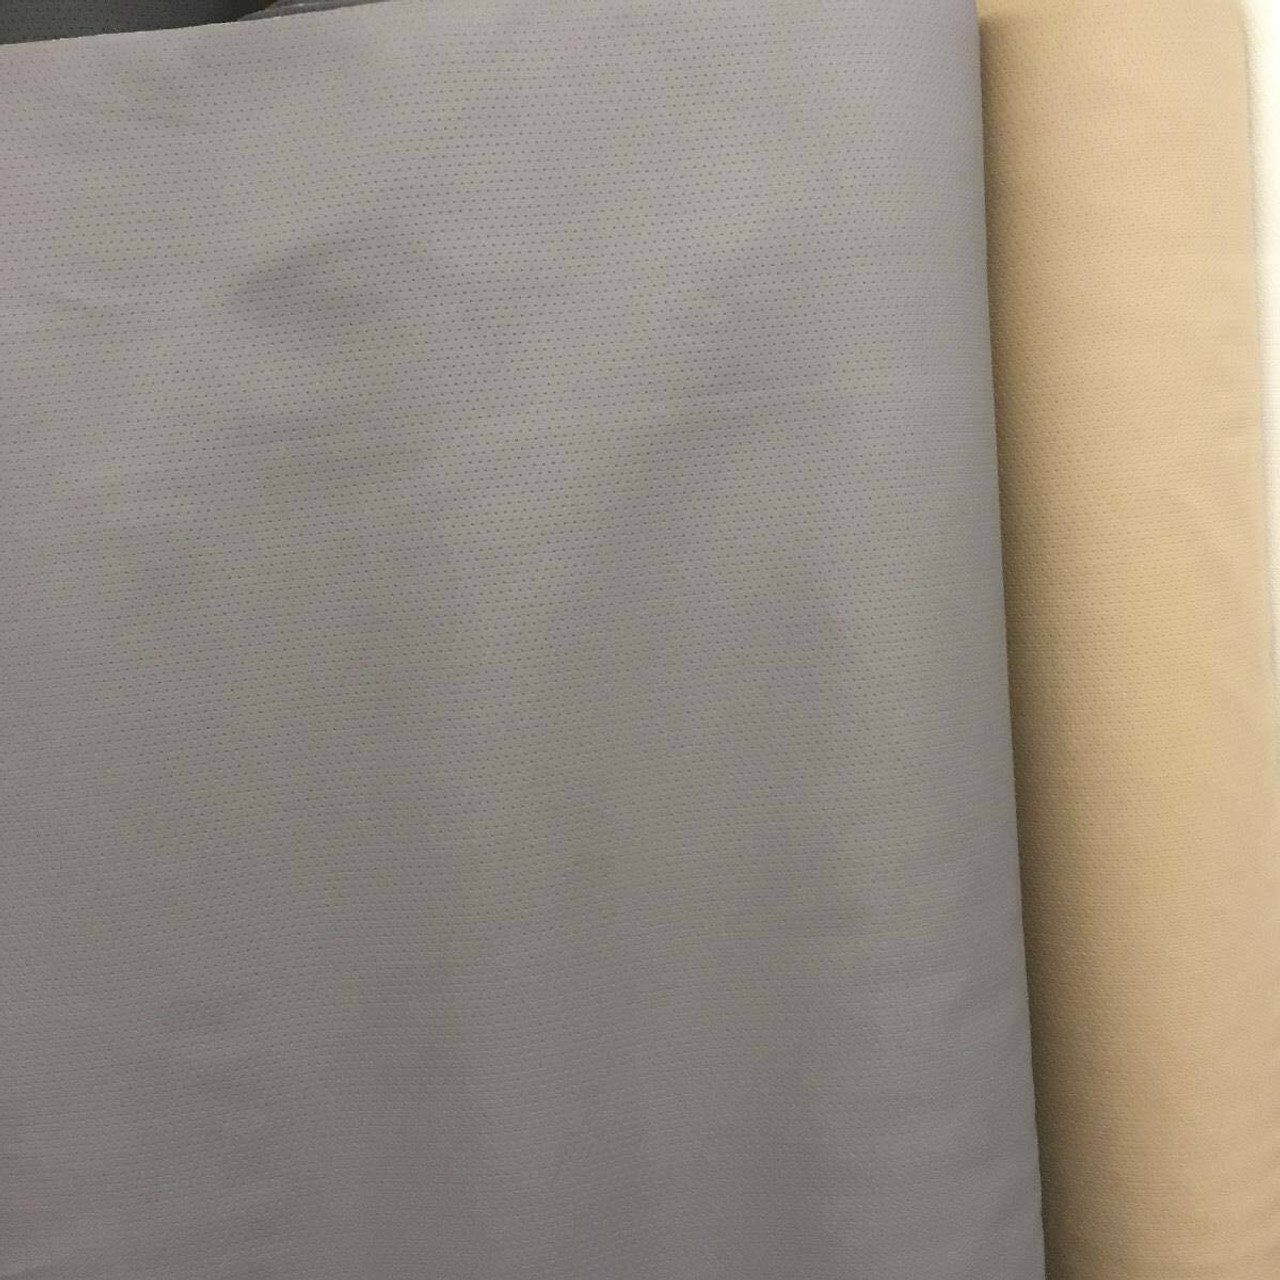 Dotted Stretch Vinyl Fabric - Brown Many Colors Available